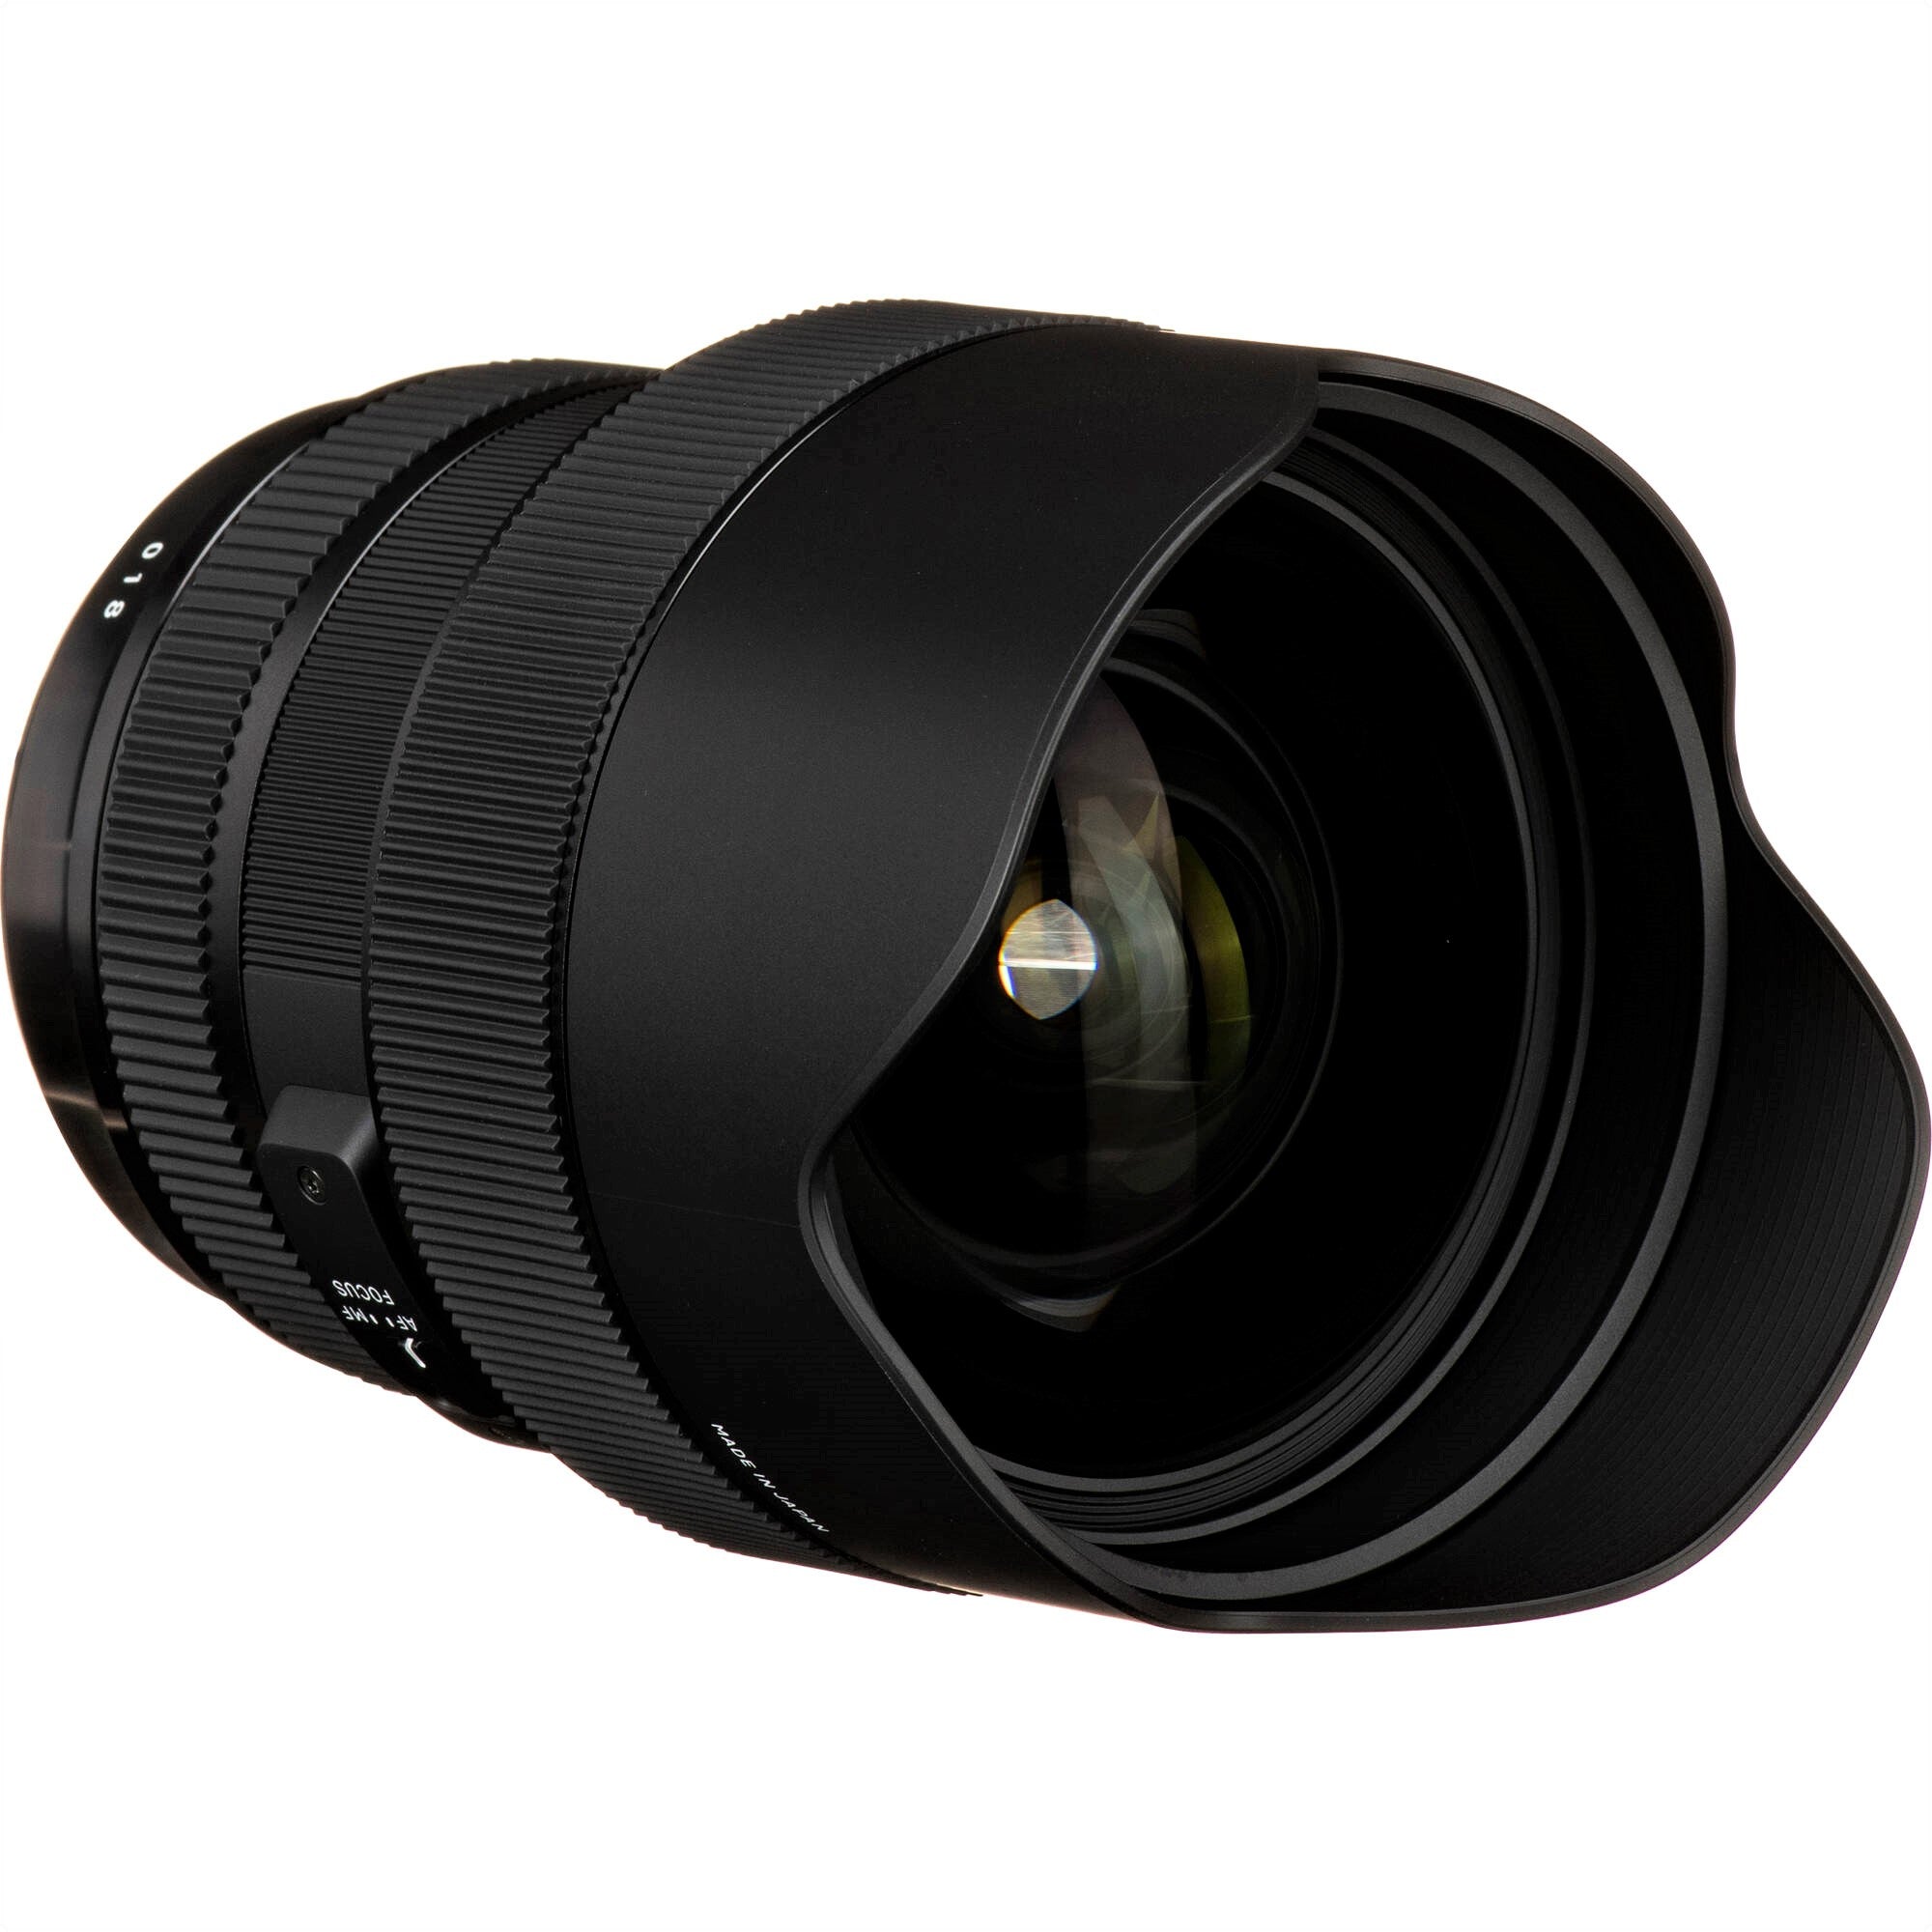 Sigma 14-24mm F2.8 DG HSM Art Lens for Canon EF in a Front Side View